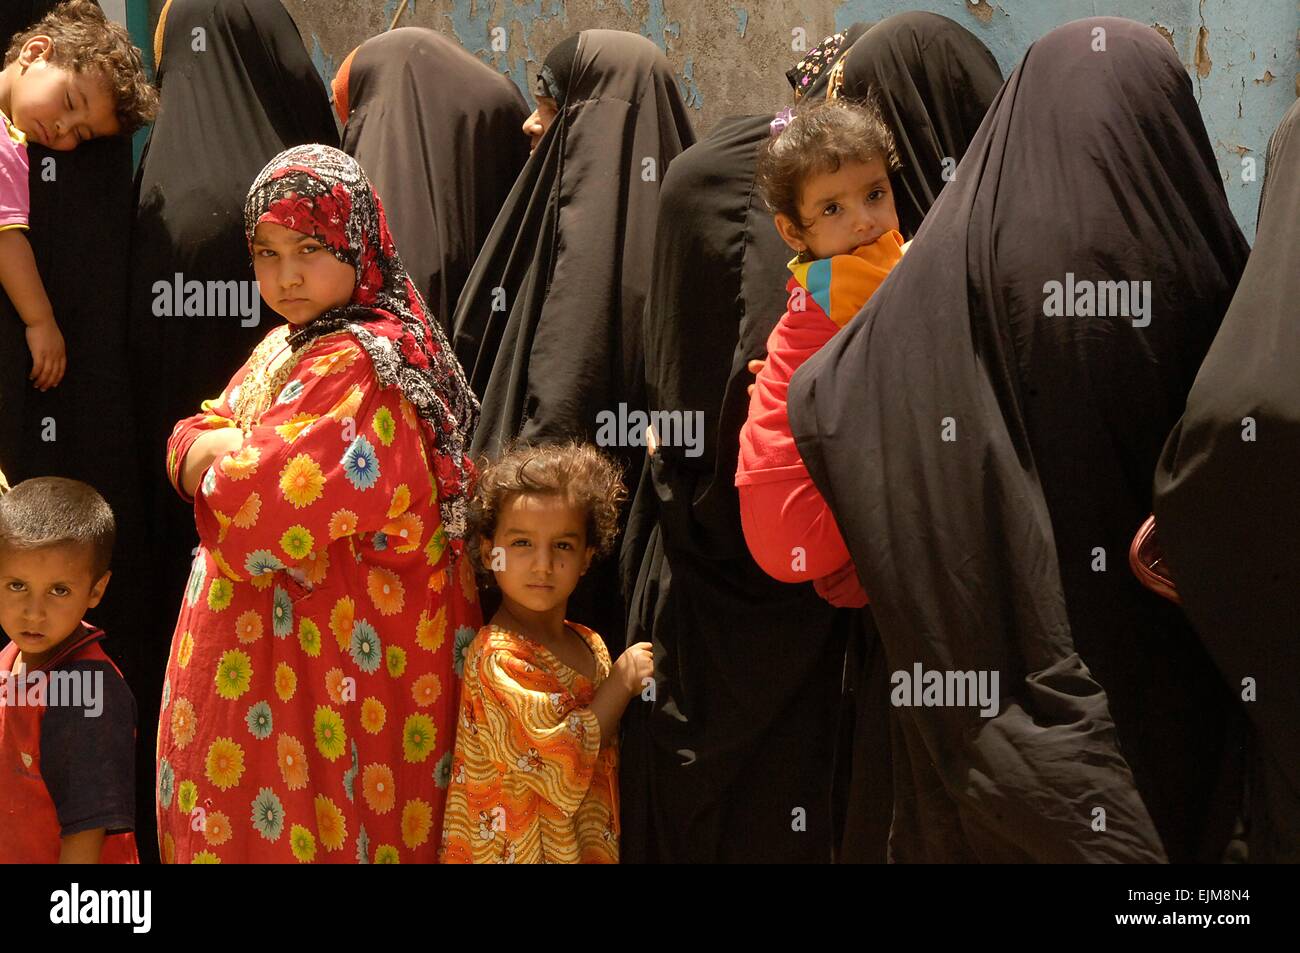 Iraqi women and children wait in line for medical care during a humanitarian aid and medical operation at Al-Nasser Police Station June 5, 2008 February 22, 2007 in Sadr City, Iraq. Stock Photo